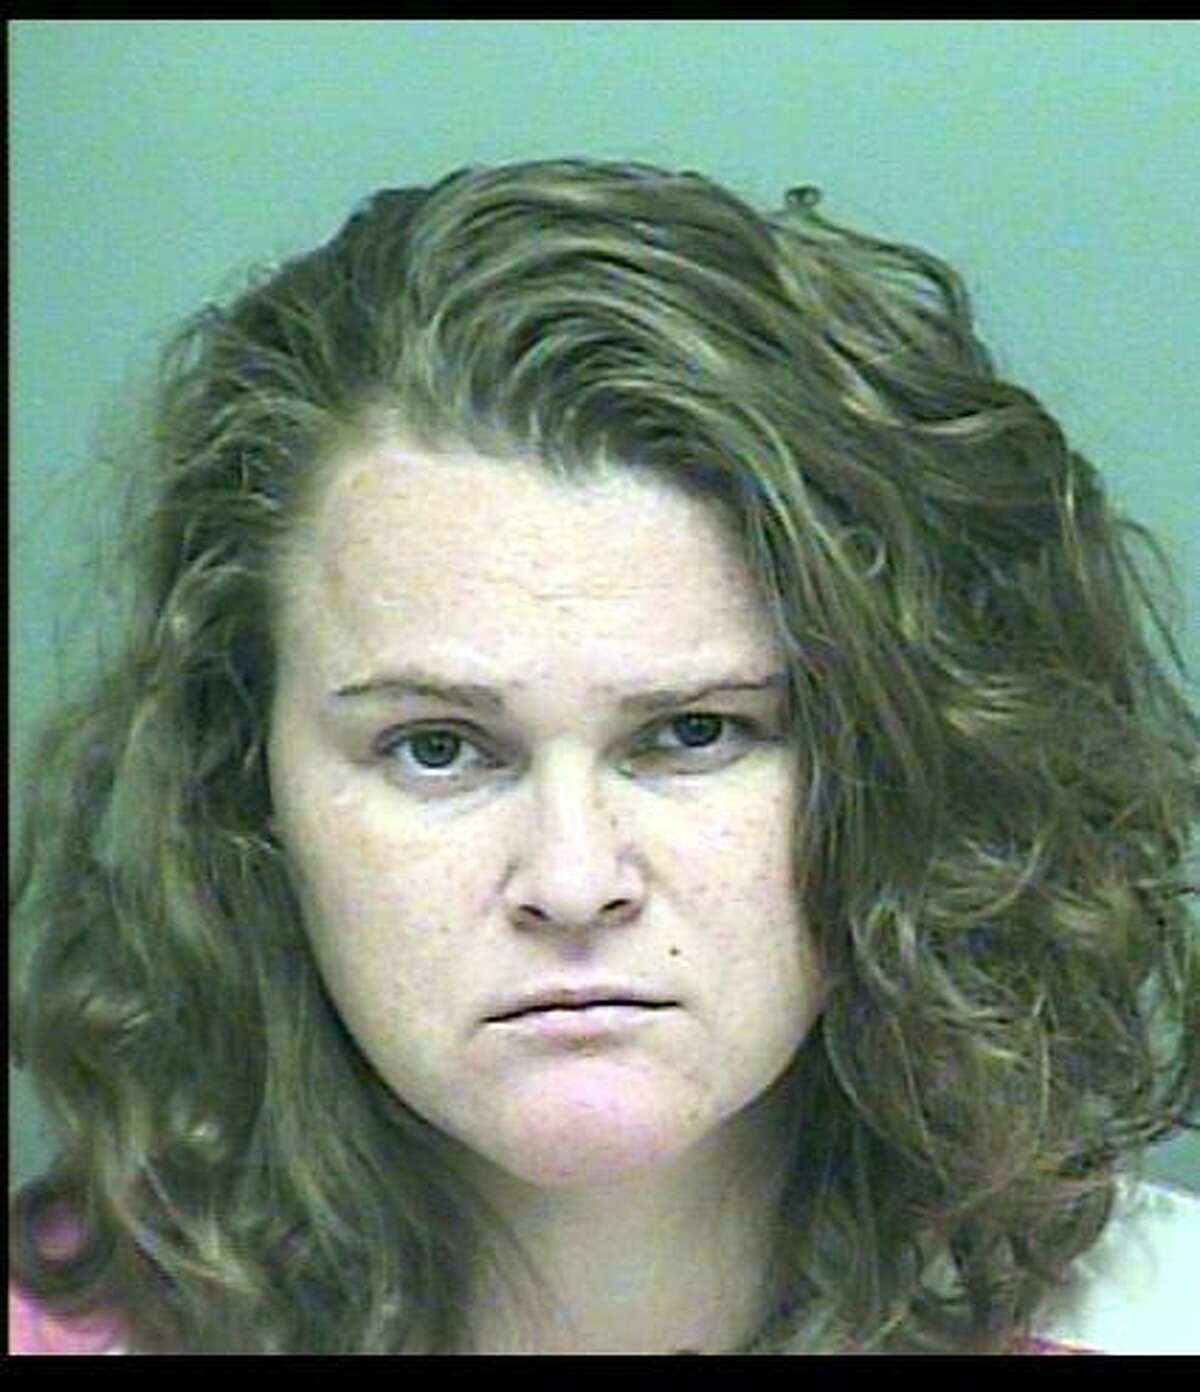 APPREHENDED: Kimberly Falk of Conroe was wanted by Montgomery County Crime Stoppers as of Dec. 4, 2015 on a charge of assault of a public servant.